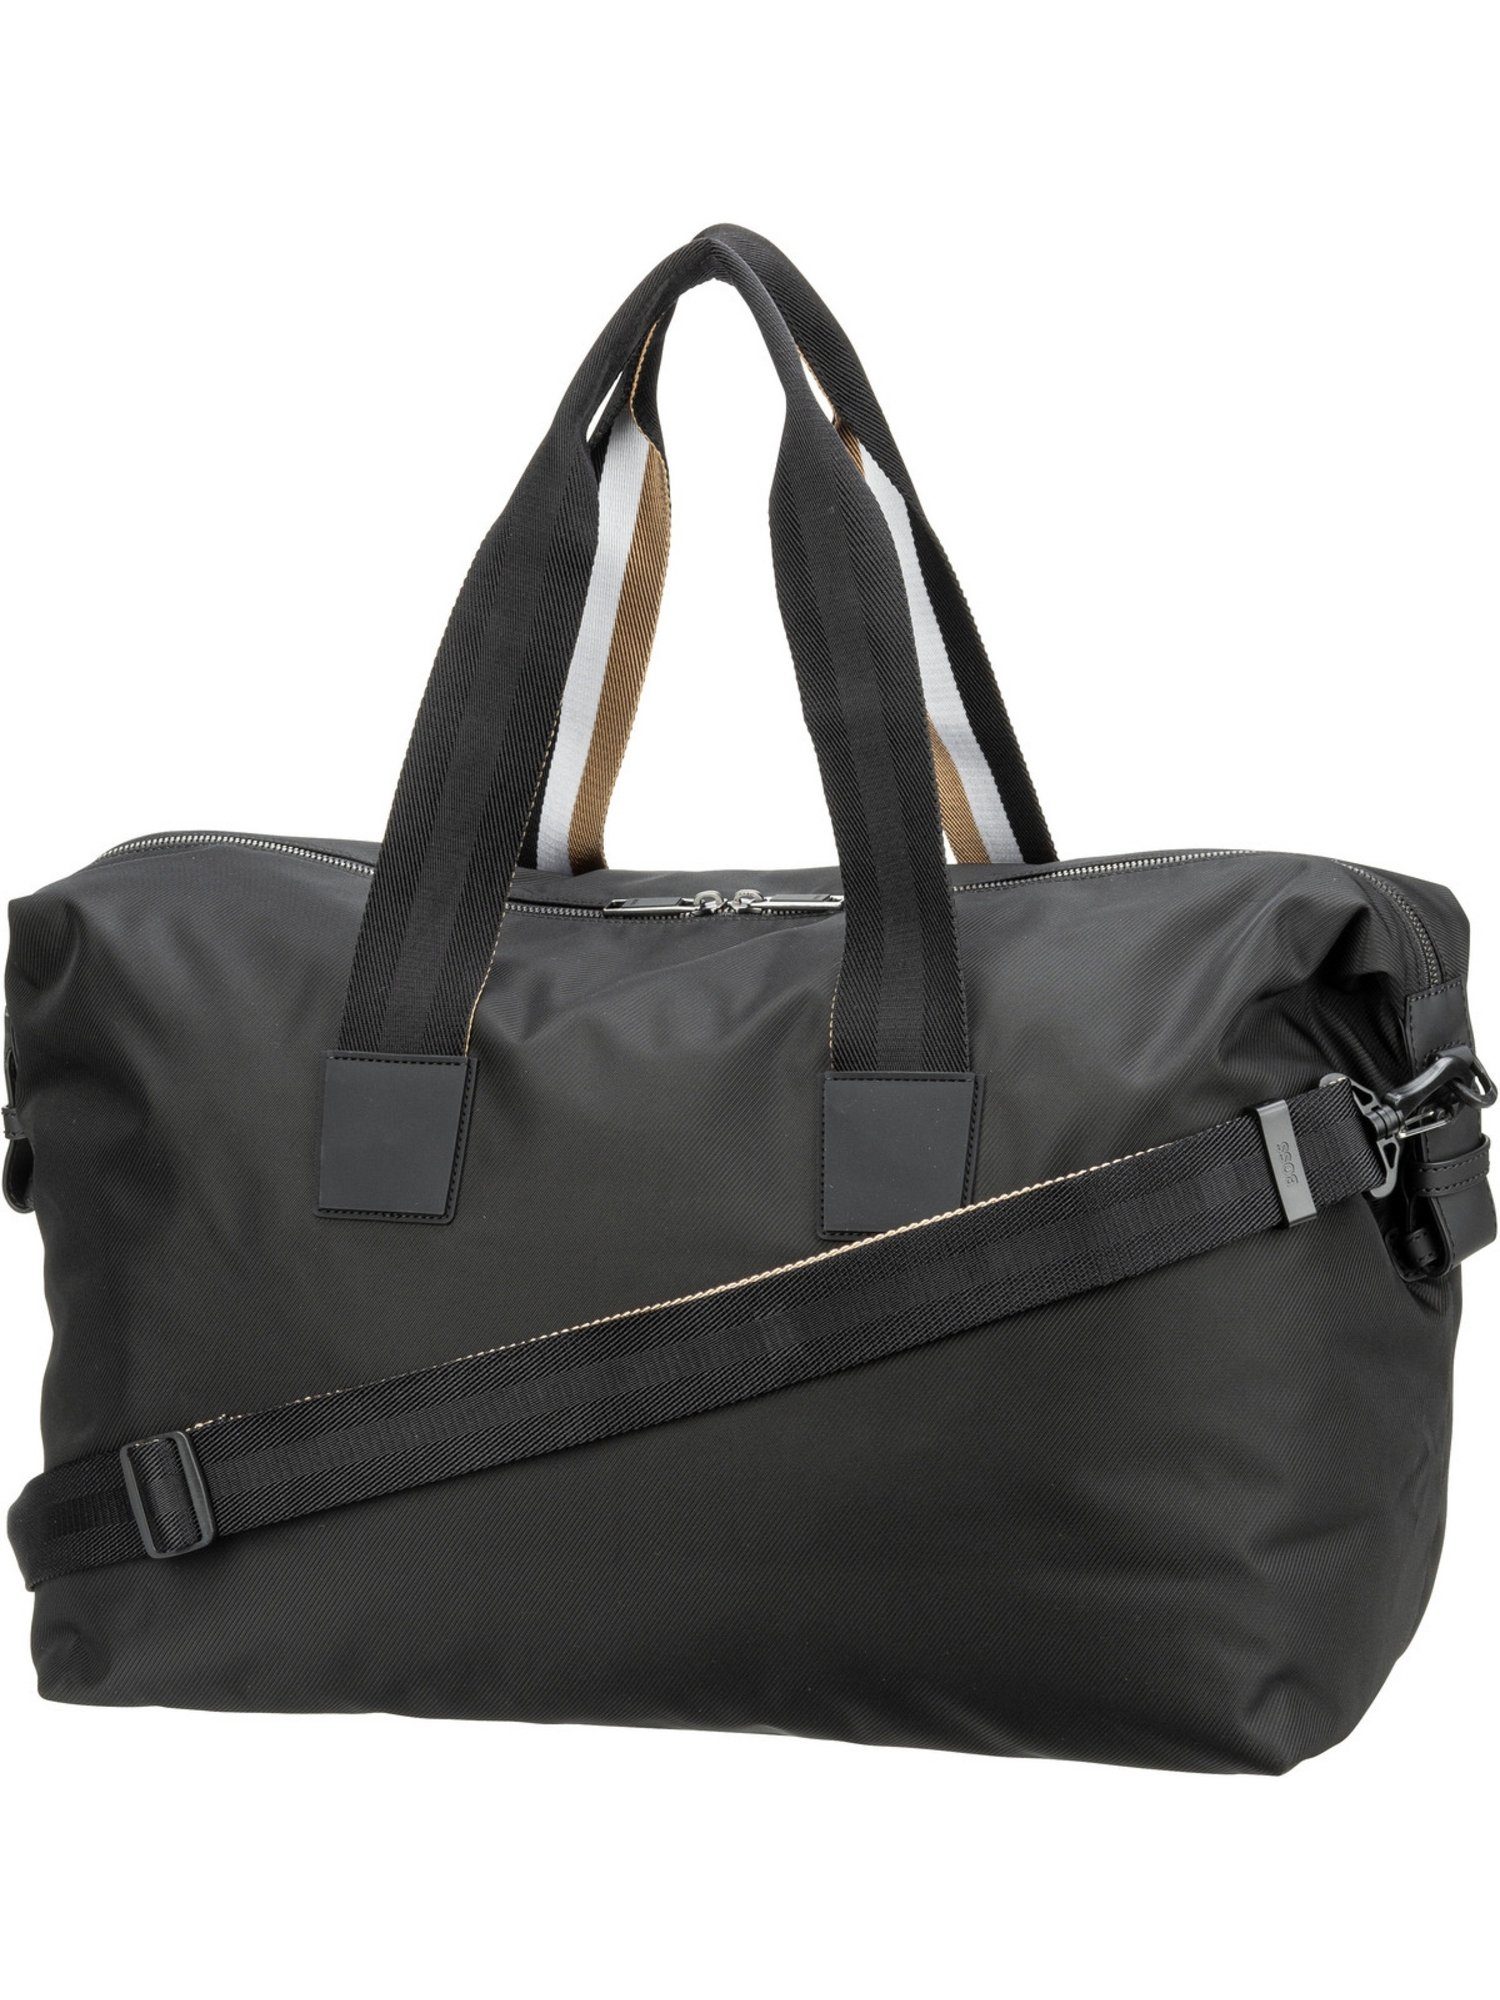 Holdall BOSS 2.0I Weekender Catch